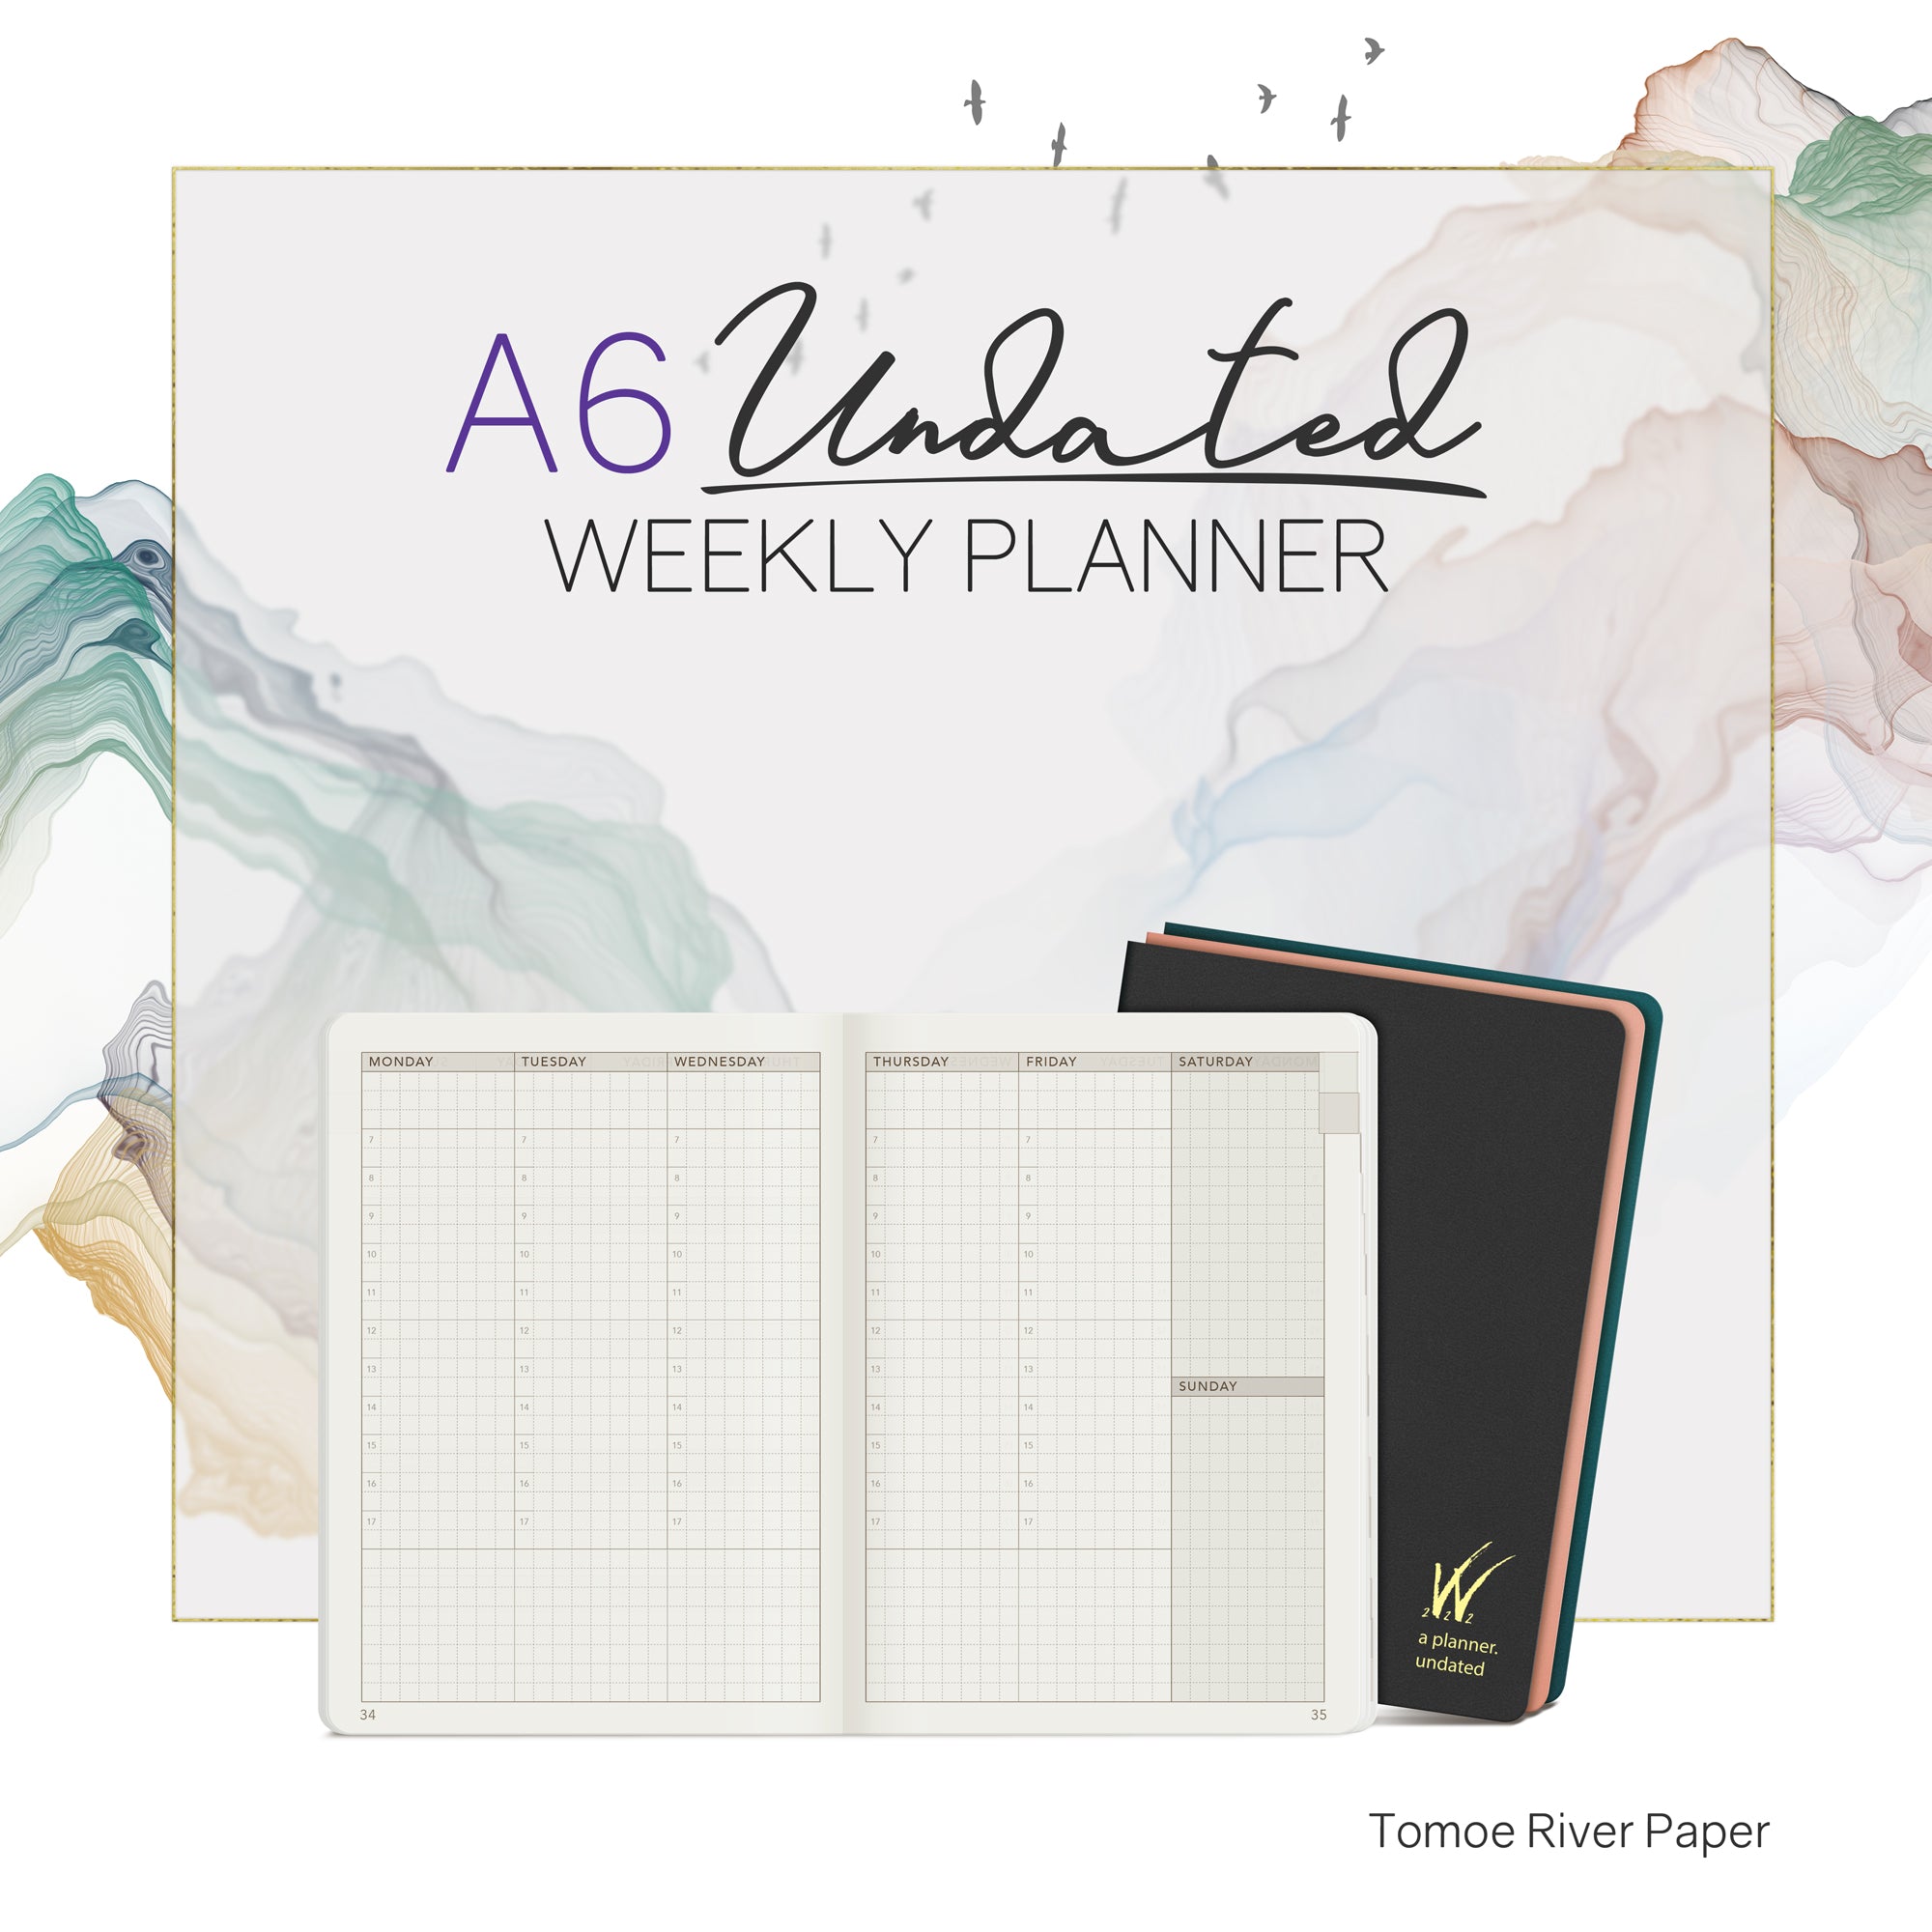 Wonderland222-A6-Undated-Planner-Open-with-Covers-Website.jpg